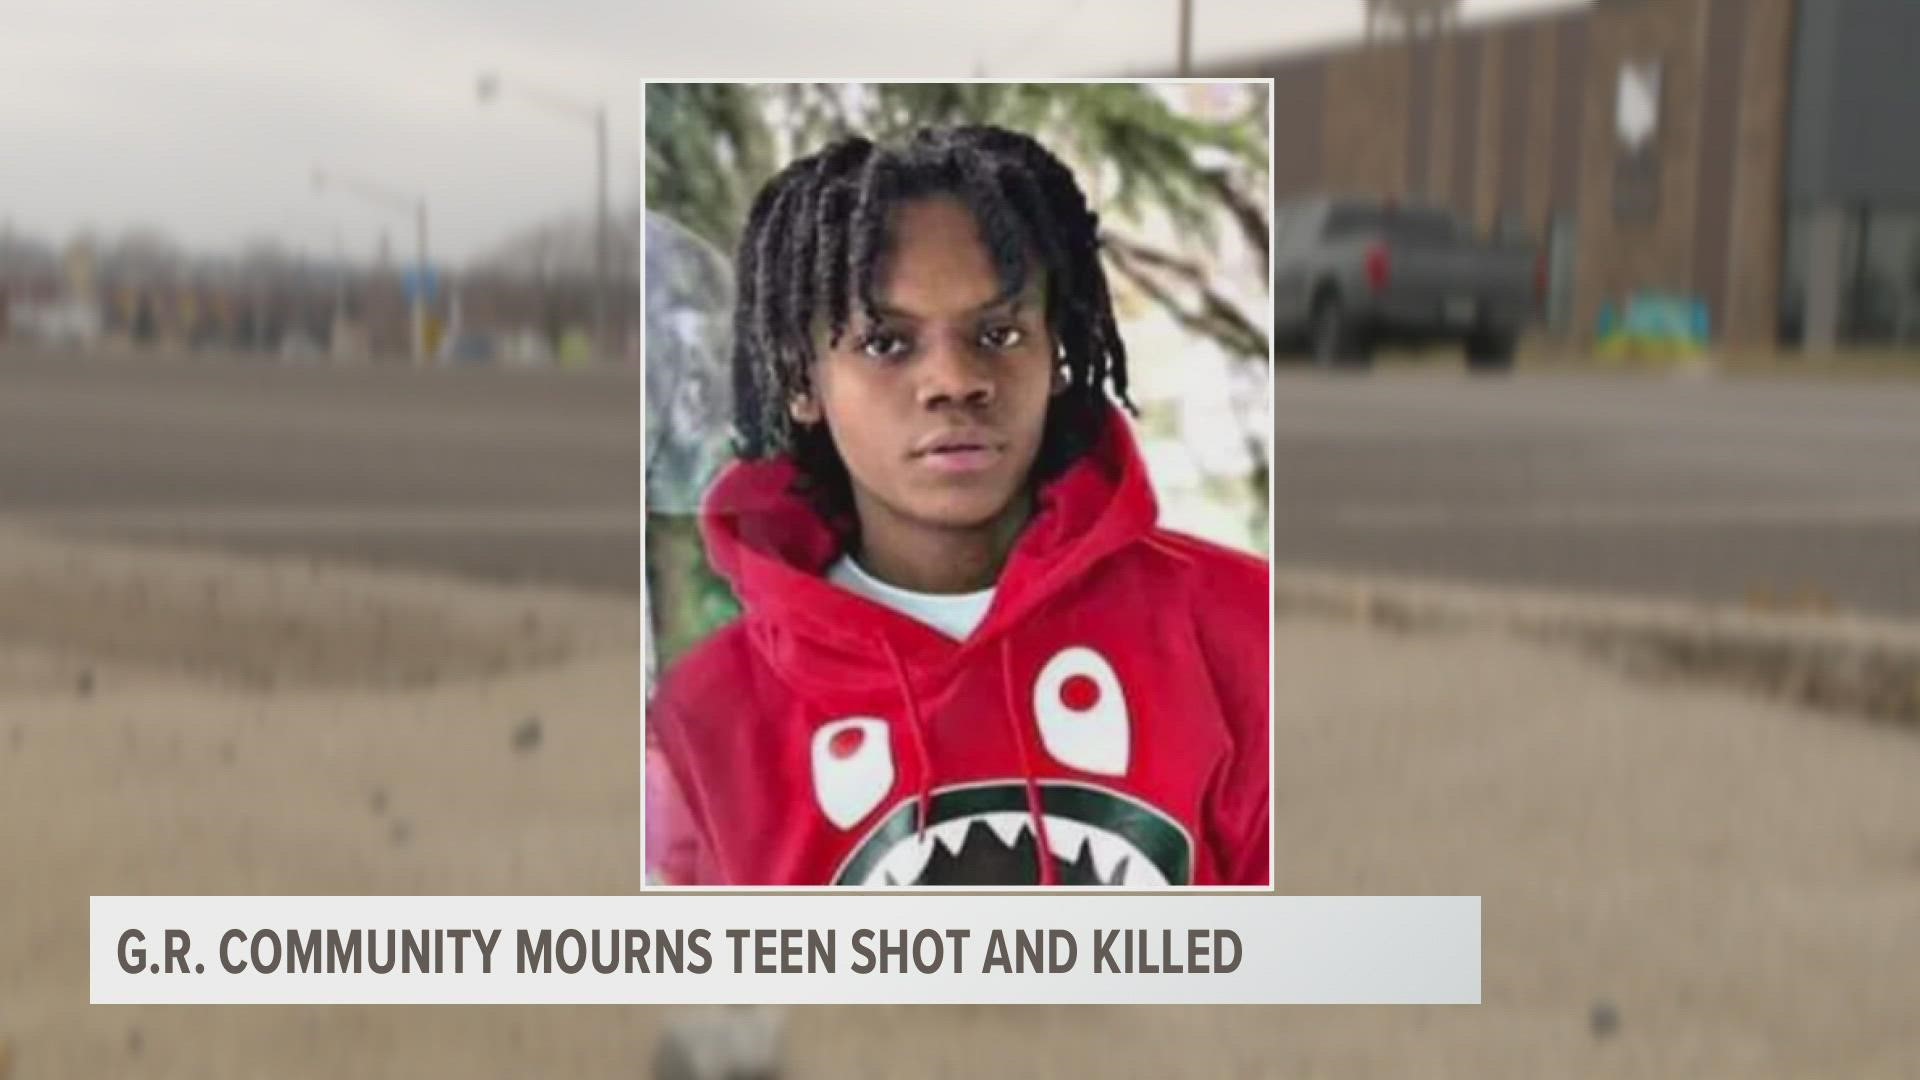 The shooting happened on 29th Street and Radcliff on Saturday night. The boy has been identified as Jamarion McCuller.